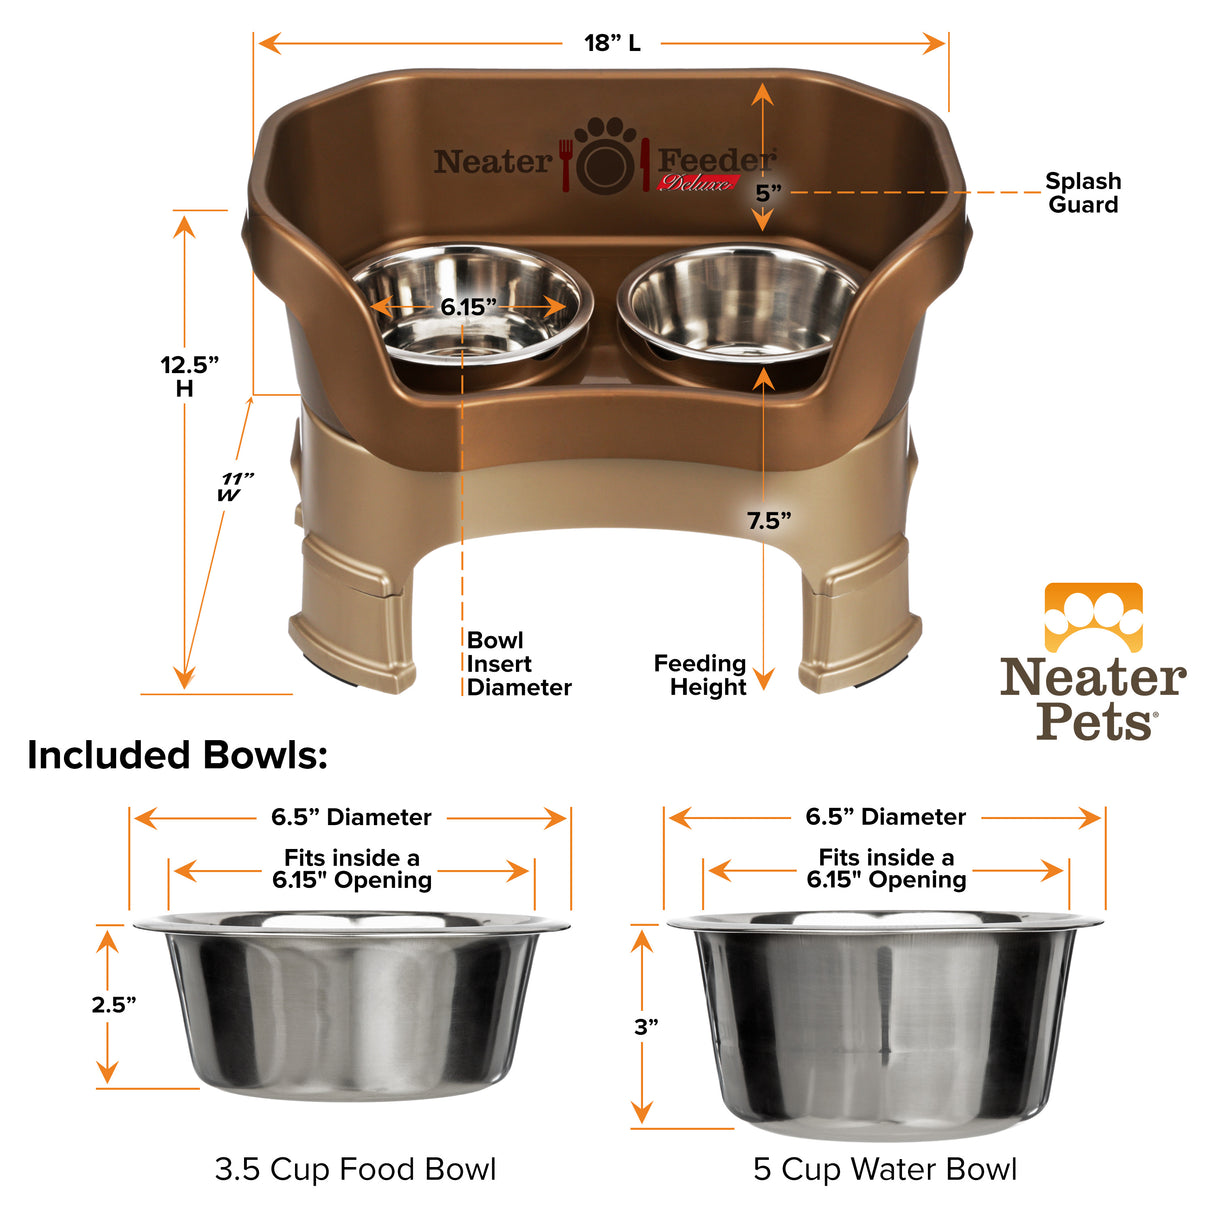 Deluxe Bronze Medium Dog Neater Feeder with leg extensions and Bowl dimensions